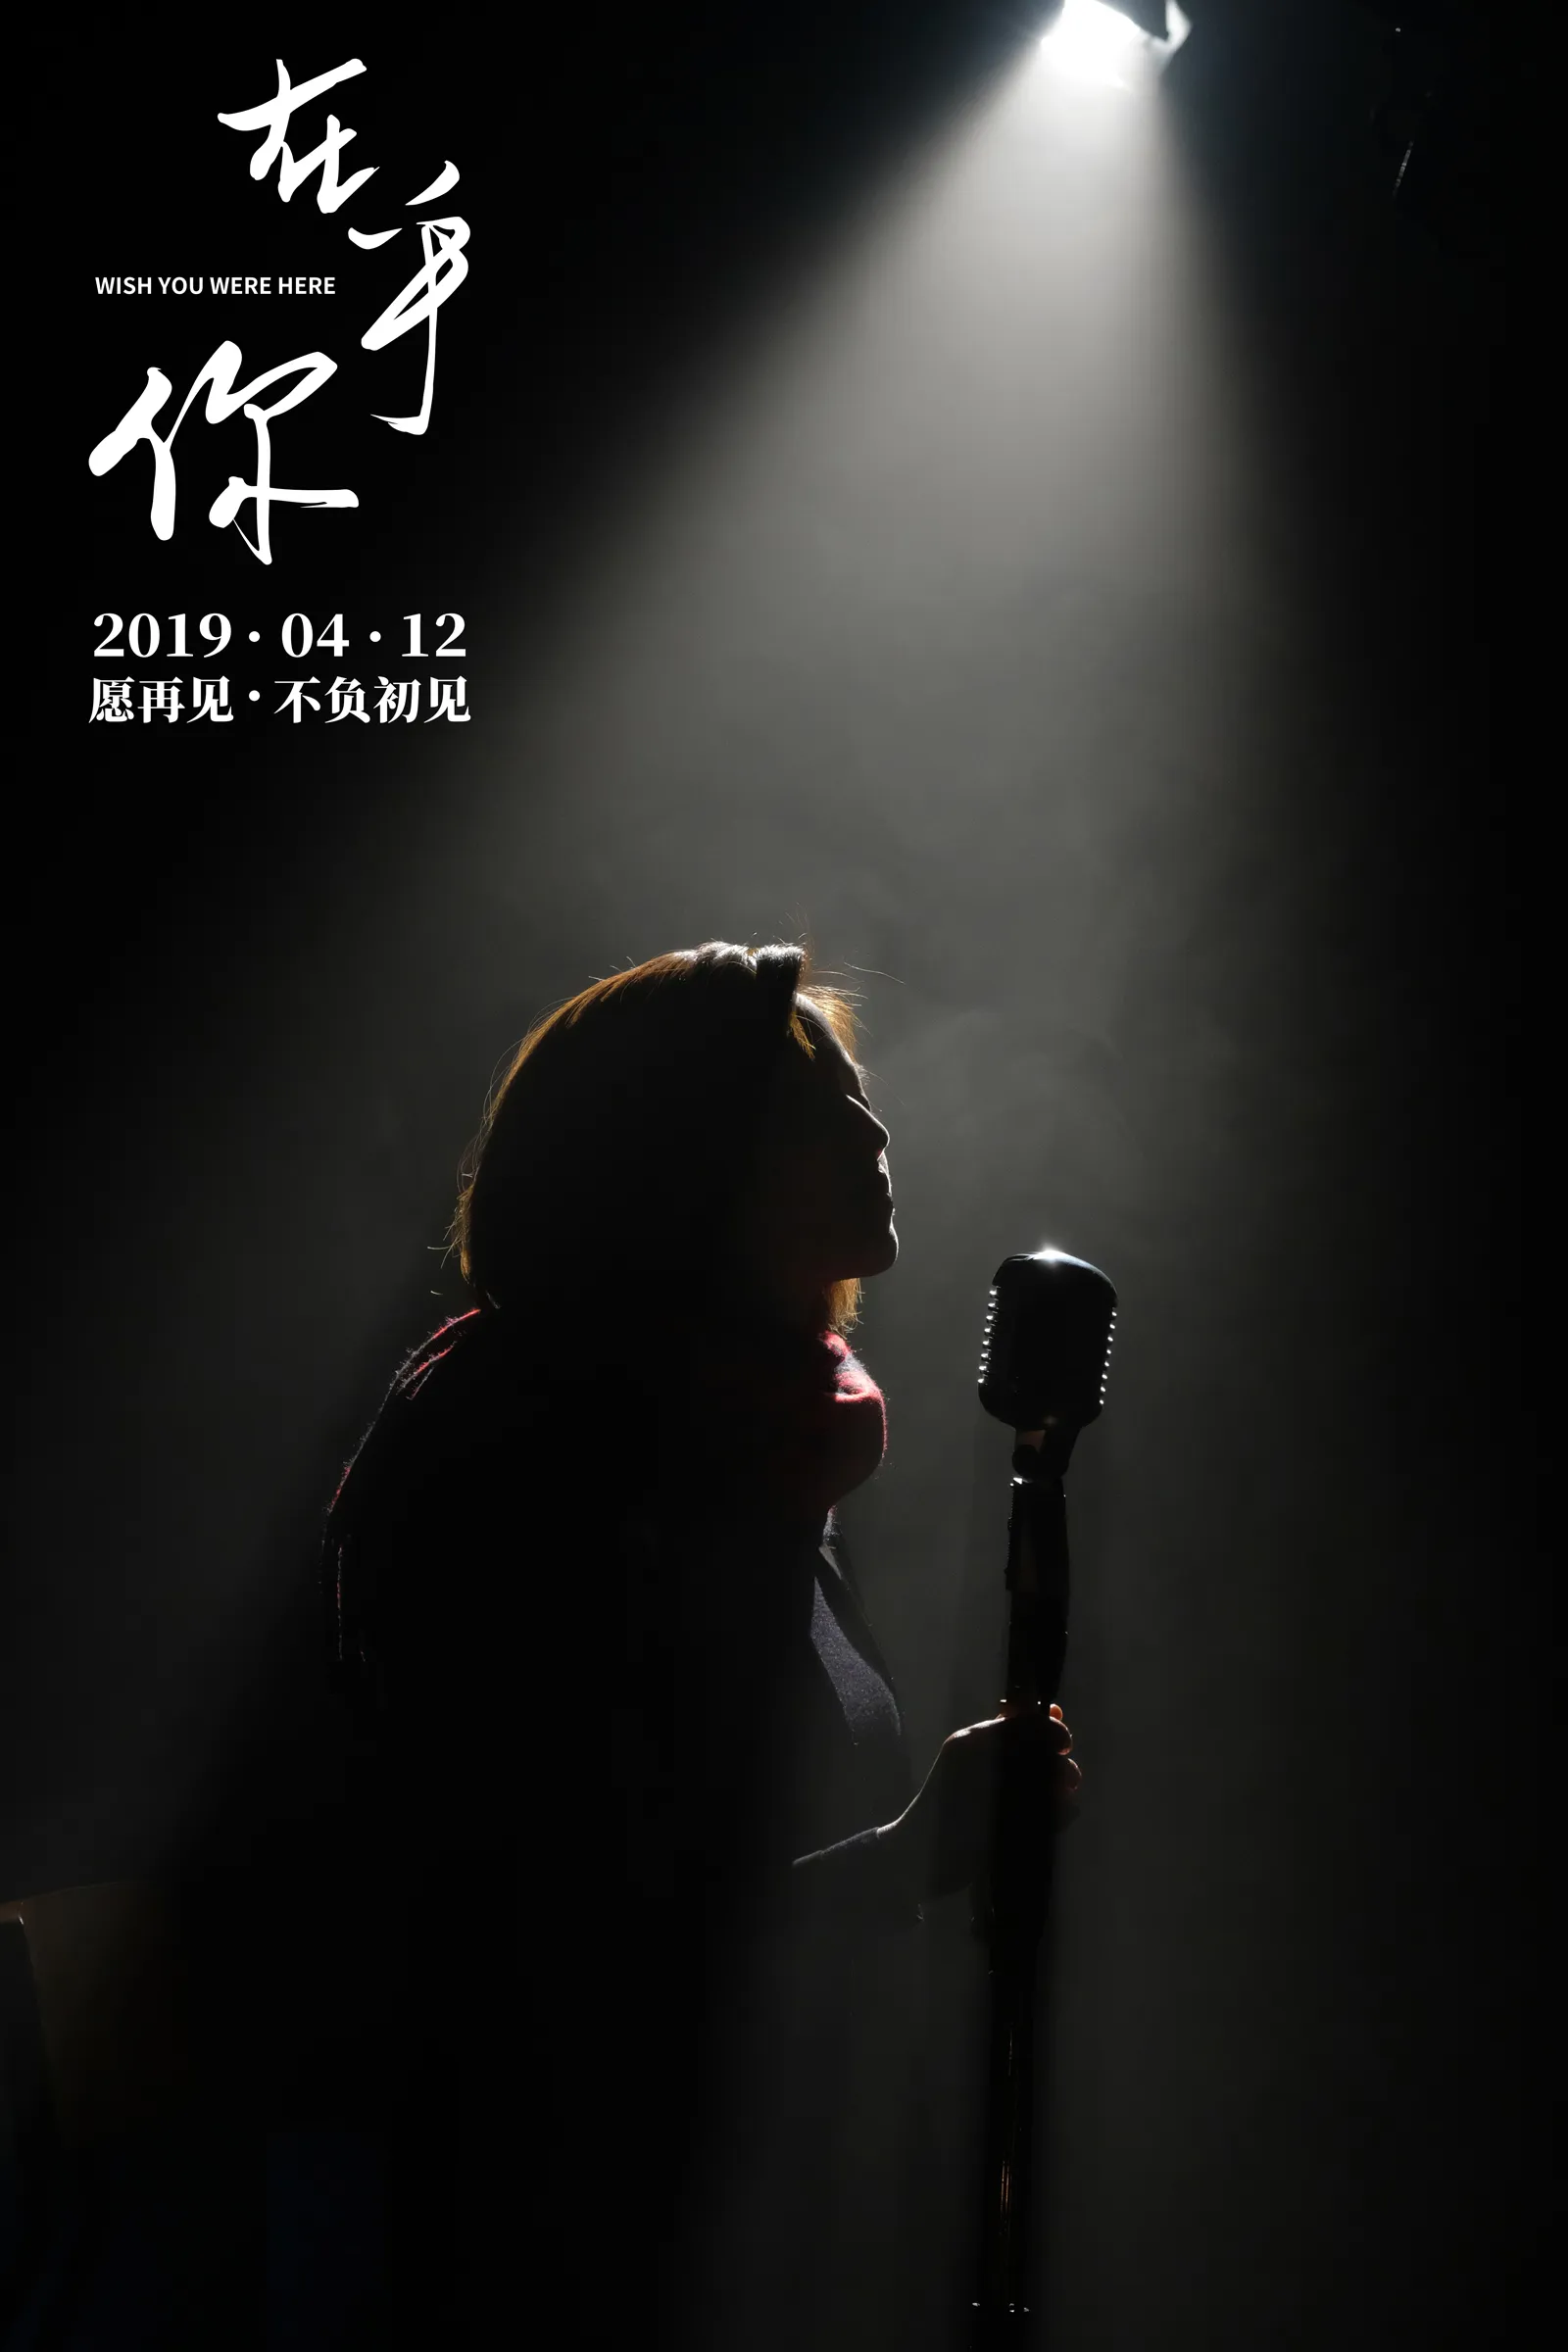  Yin Yin Ma 现场演唱《 I only care about you 》.jpg